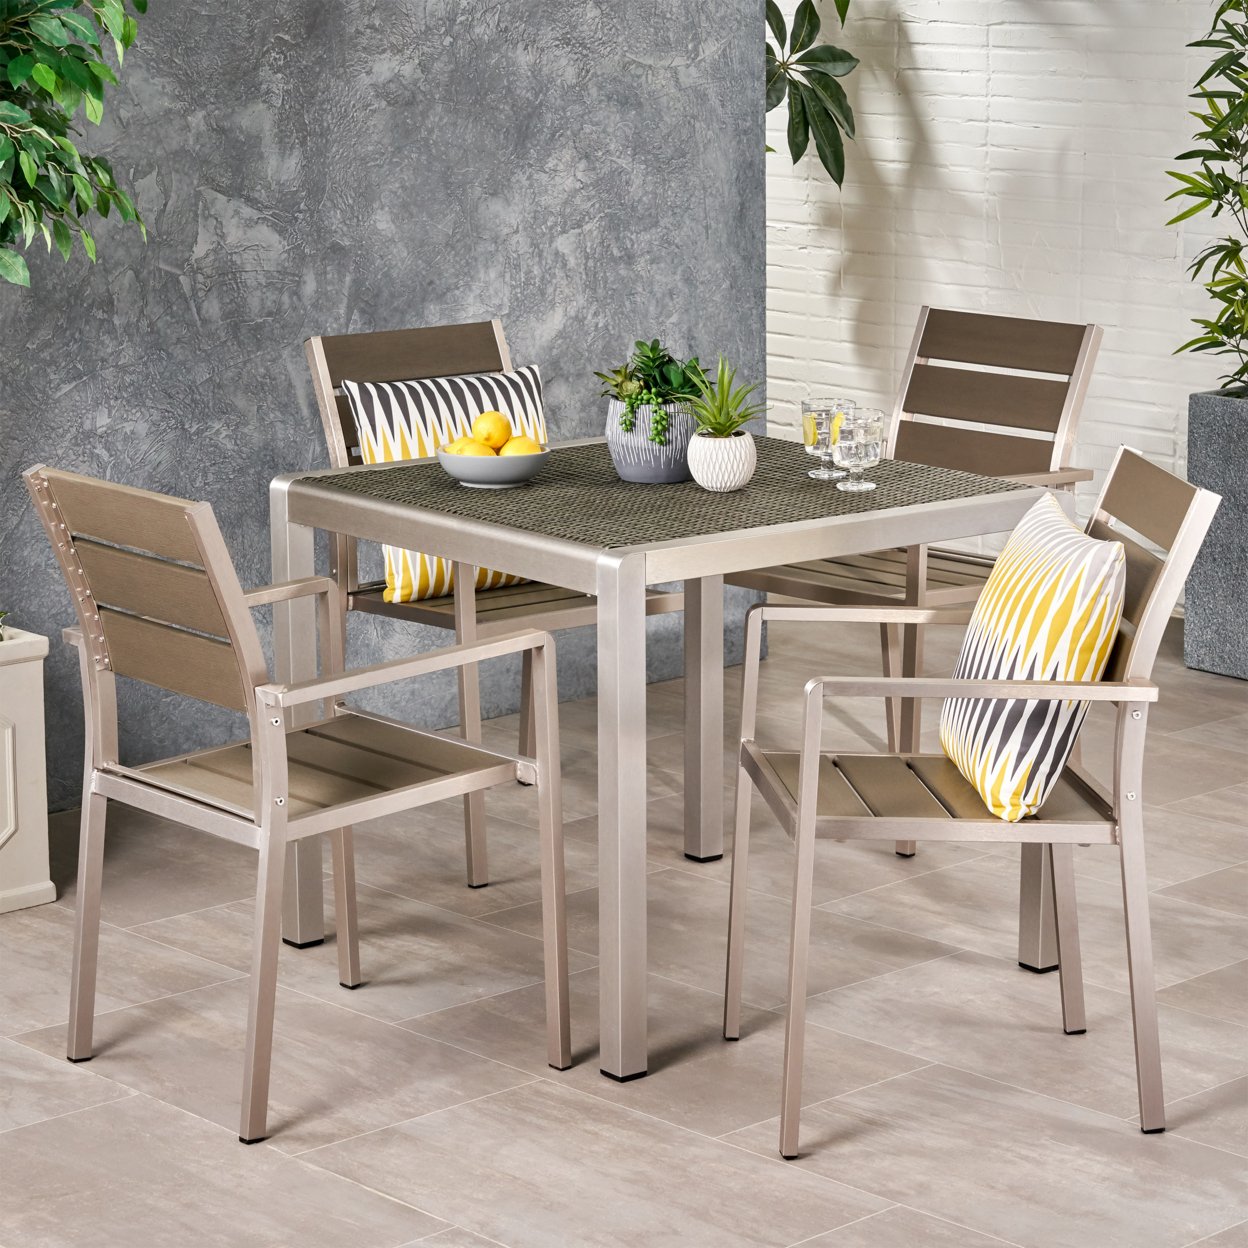 Jodie Outdoor Modern Aluminum 4 Seater Dining Set With Faux Wood Seats - Gray + Silver